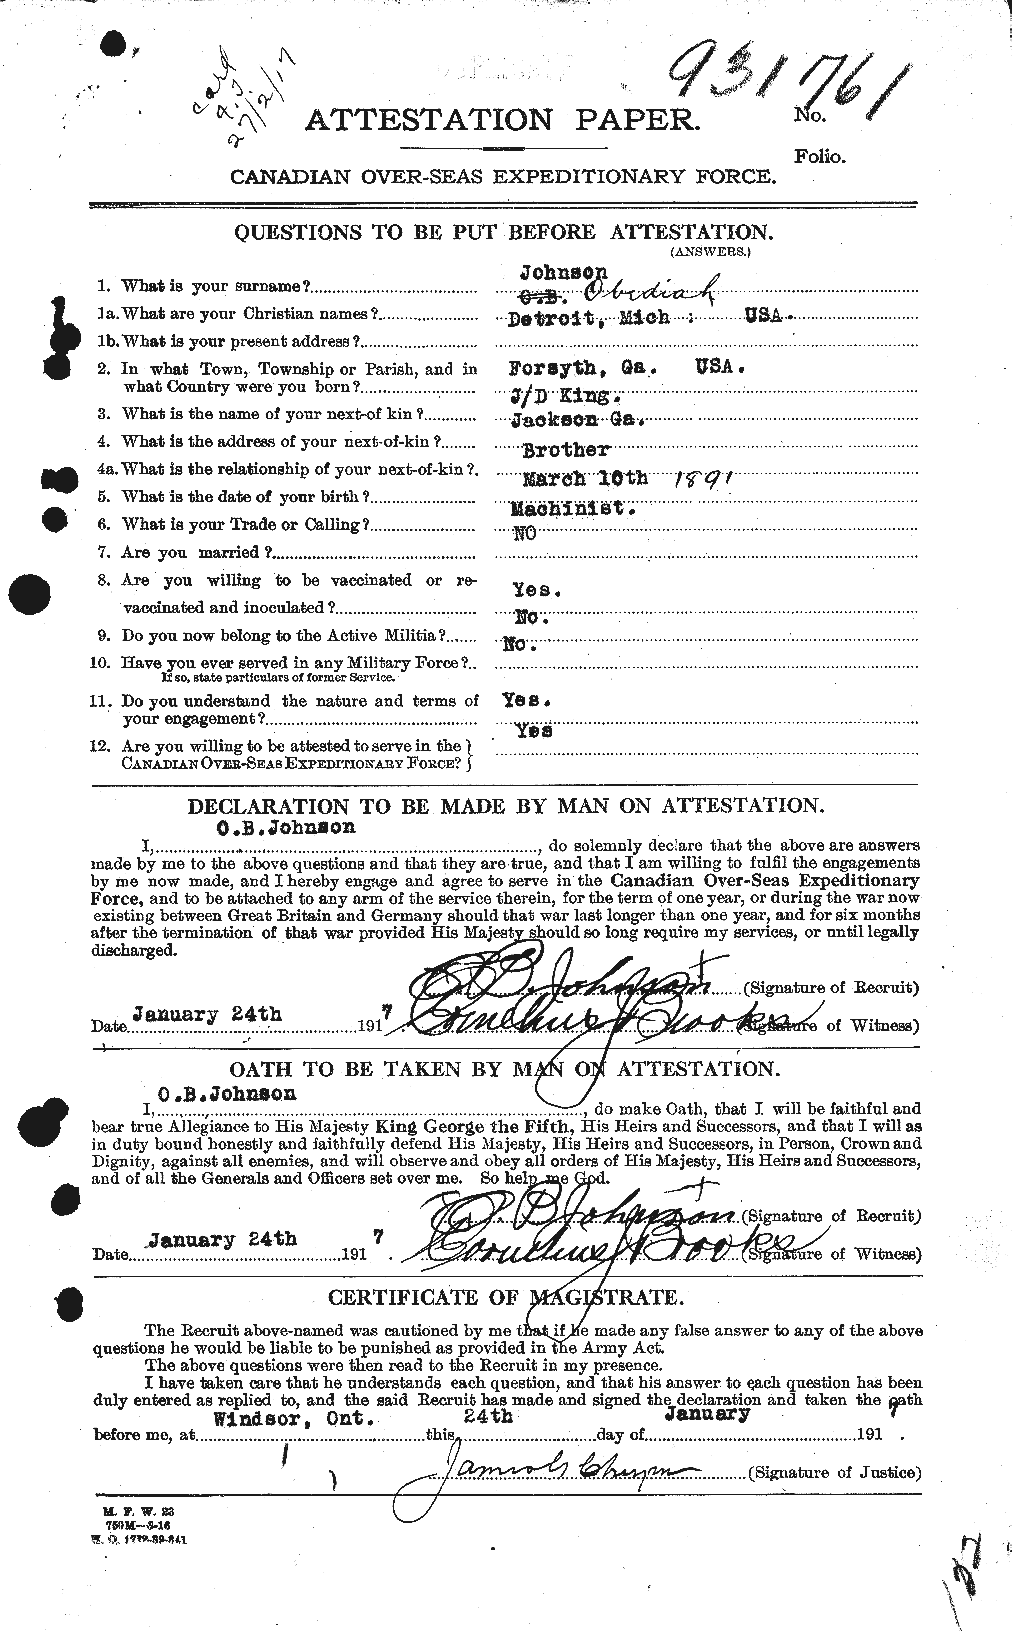 Personnel Records of the First World War - CEF 417191a